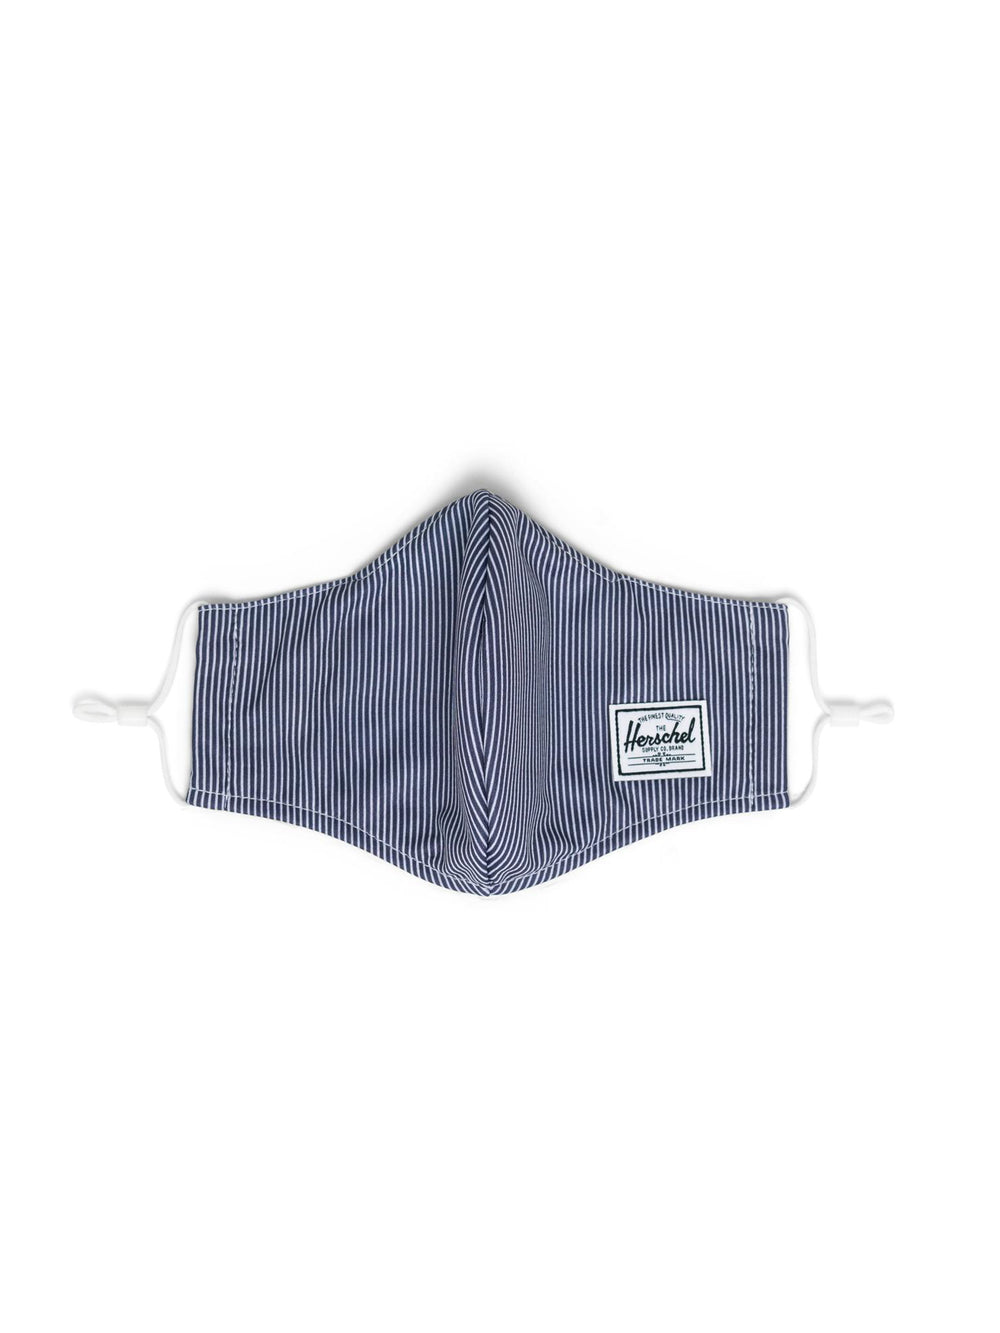 HERSCHEL SUPPLY CO. CLS FITTED MASK - CLEARANCE